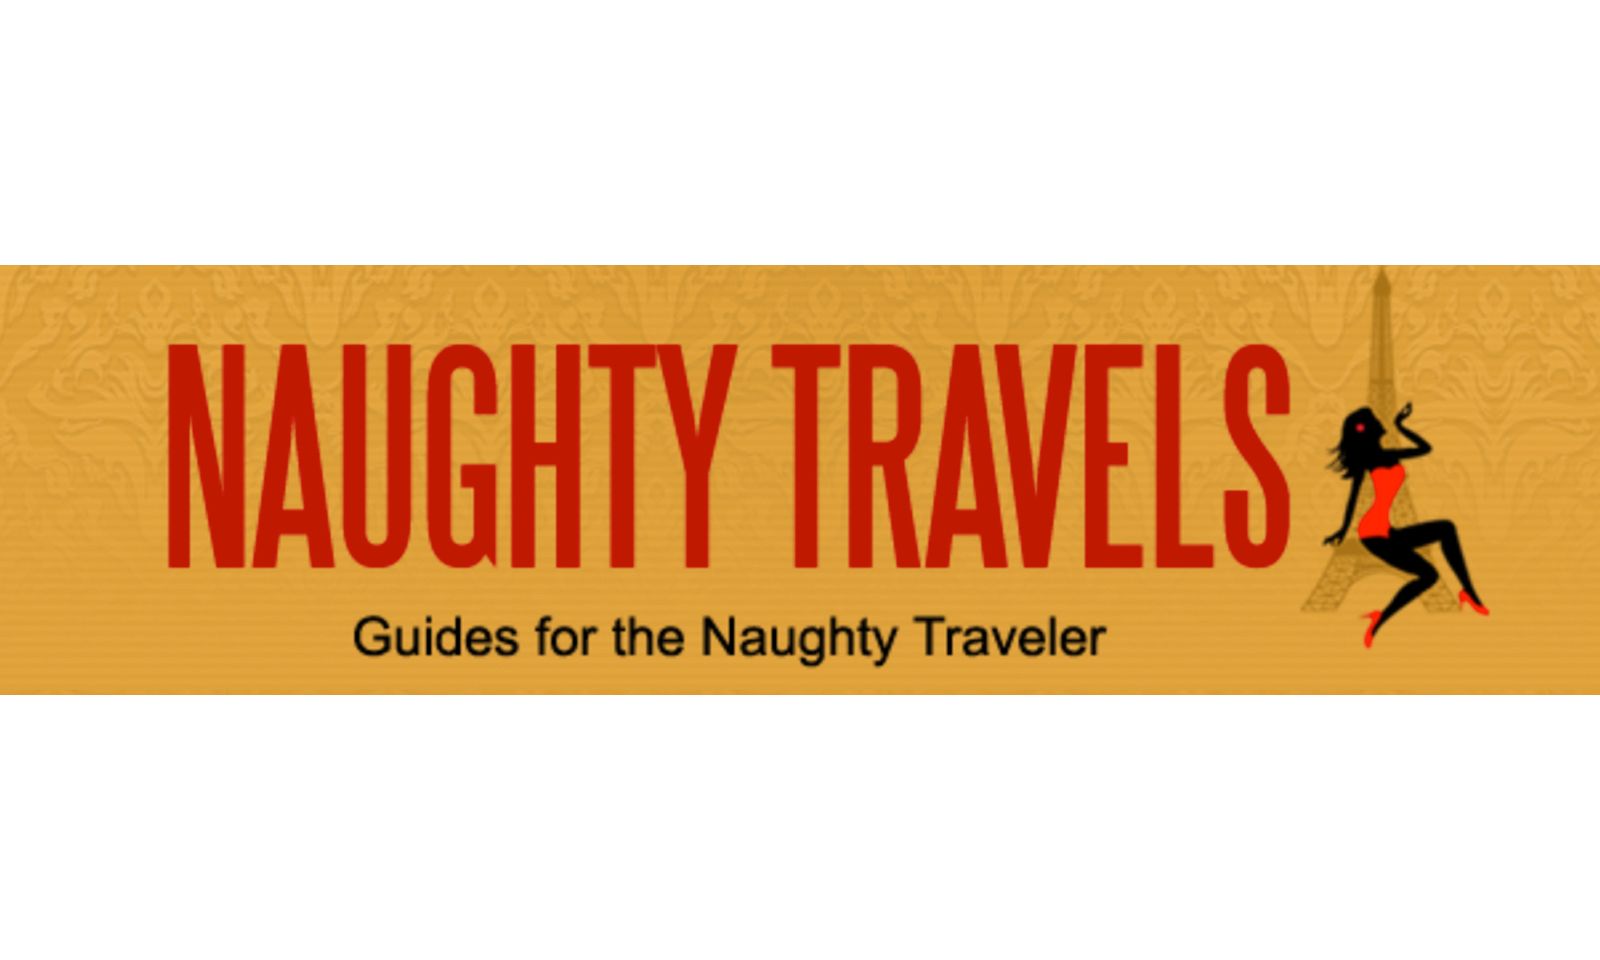 Sienna Sinclaire Set To Launch 5th Naughty eBook